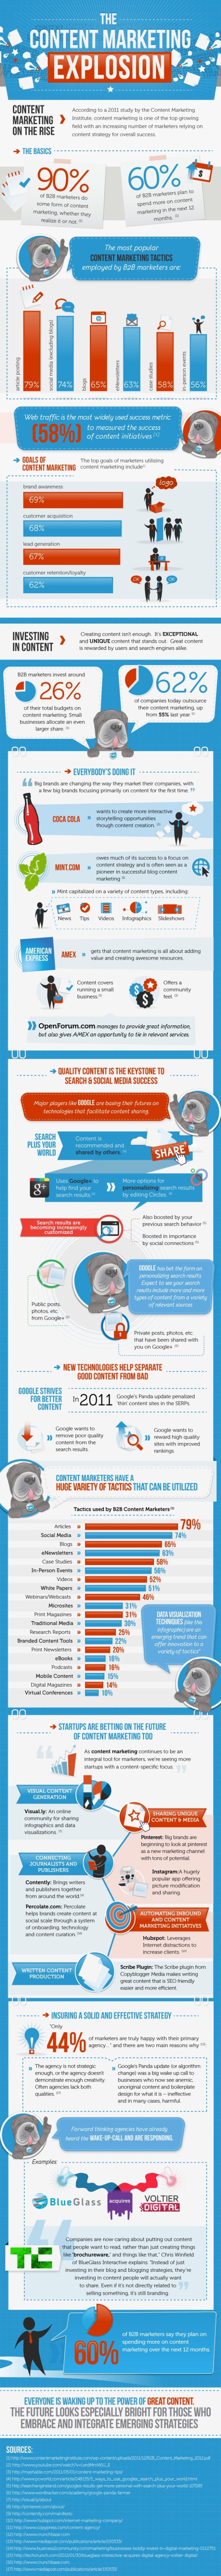 Marketers Who Share Content Drive Traffic, Gain Customers [INFOGRAPHIC]